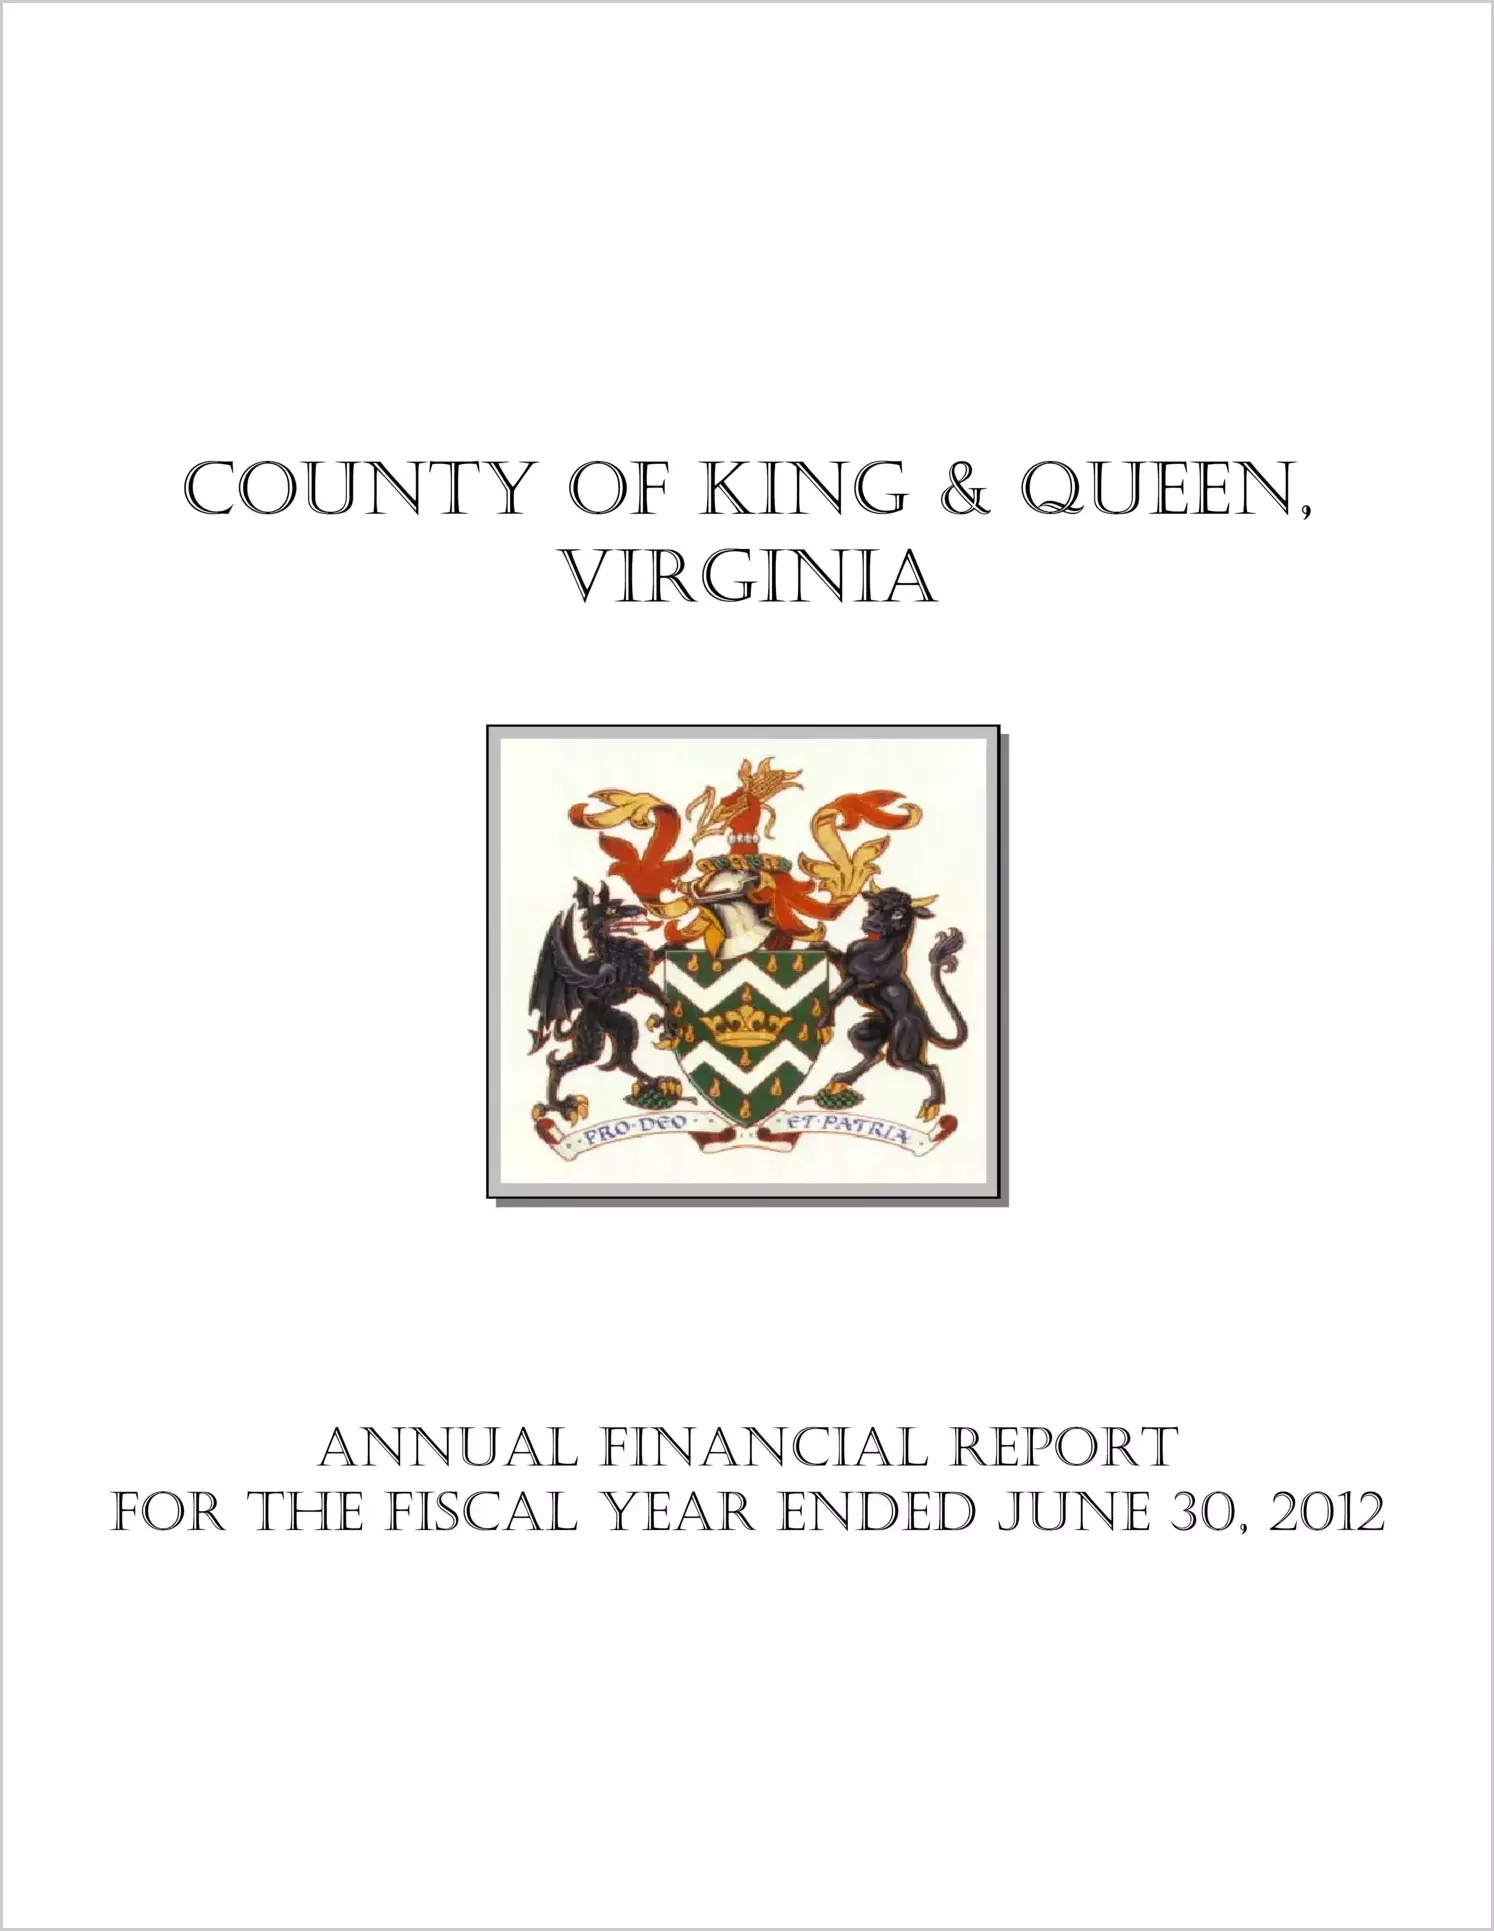 2012 Annual Financial Report for County of King & Queen